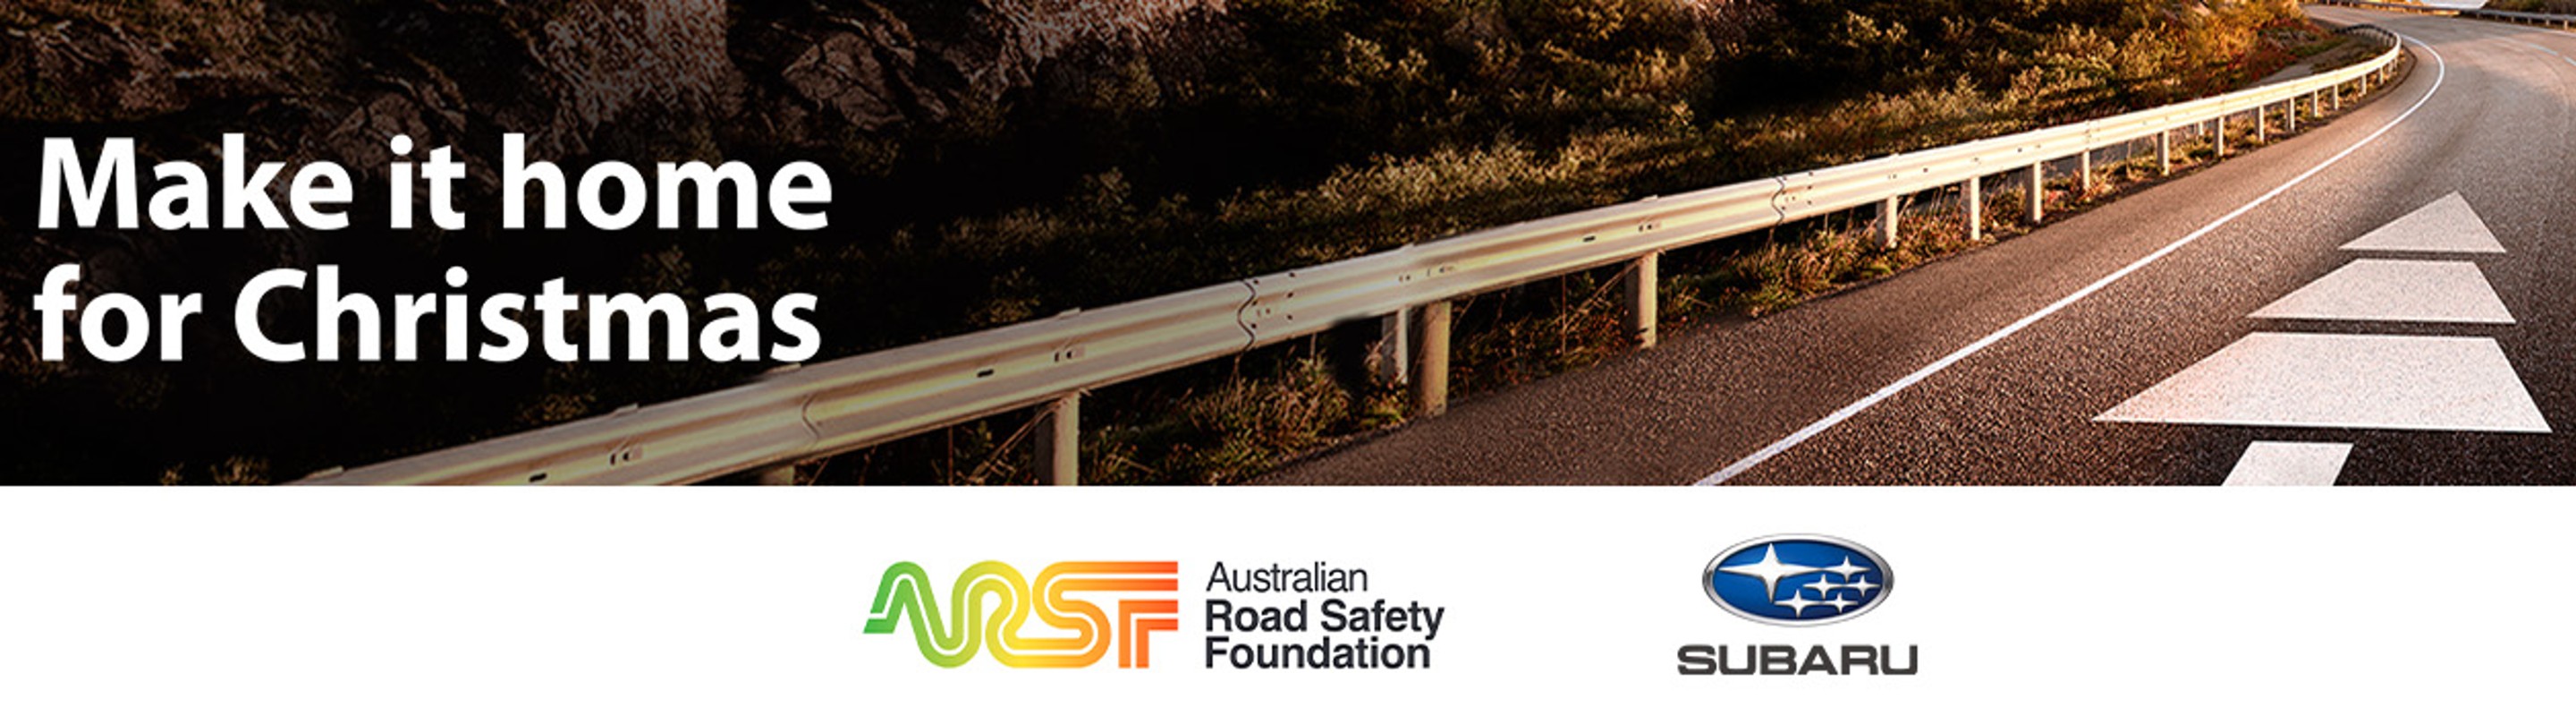 Subaru Australia supports the Australian Road Safety Foundation to urge road users to stay vigilant this Christmas